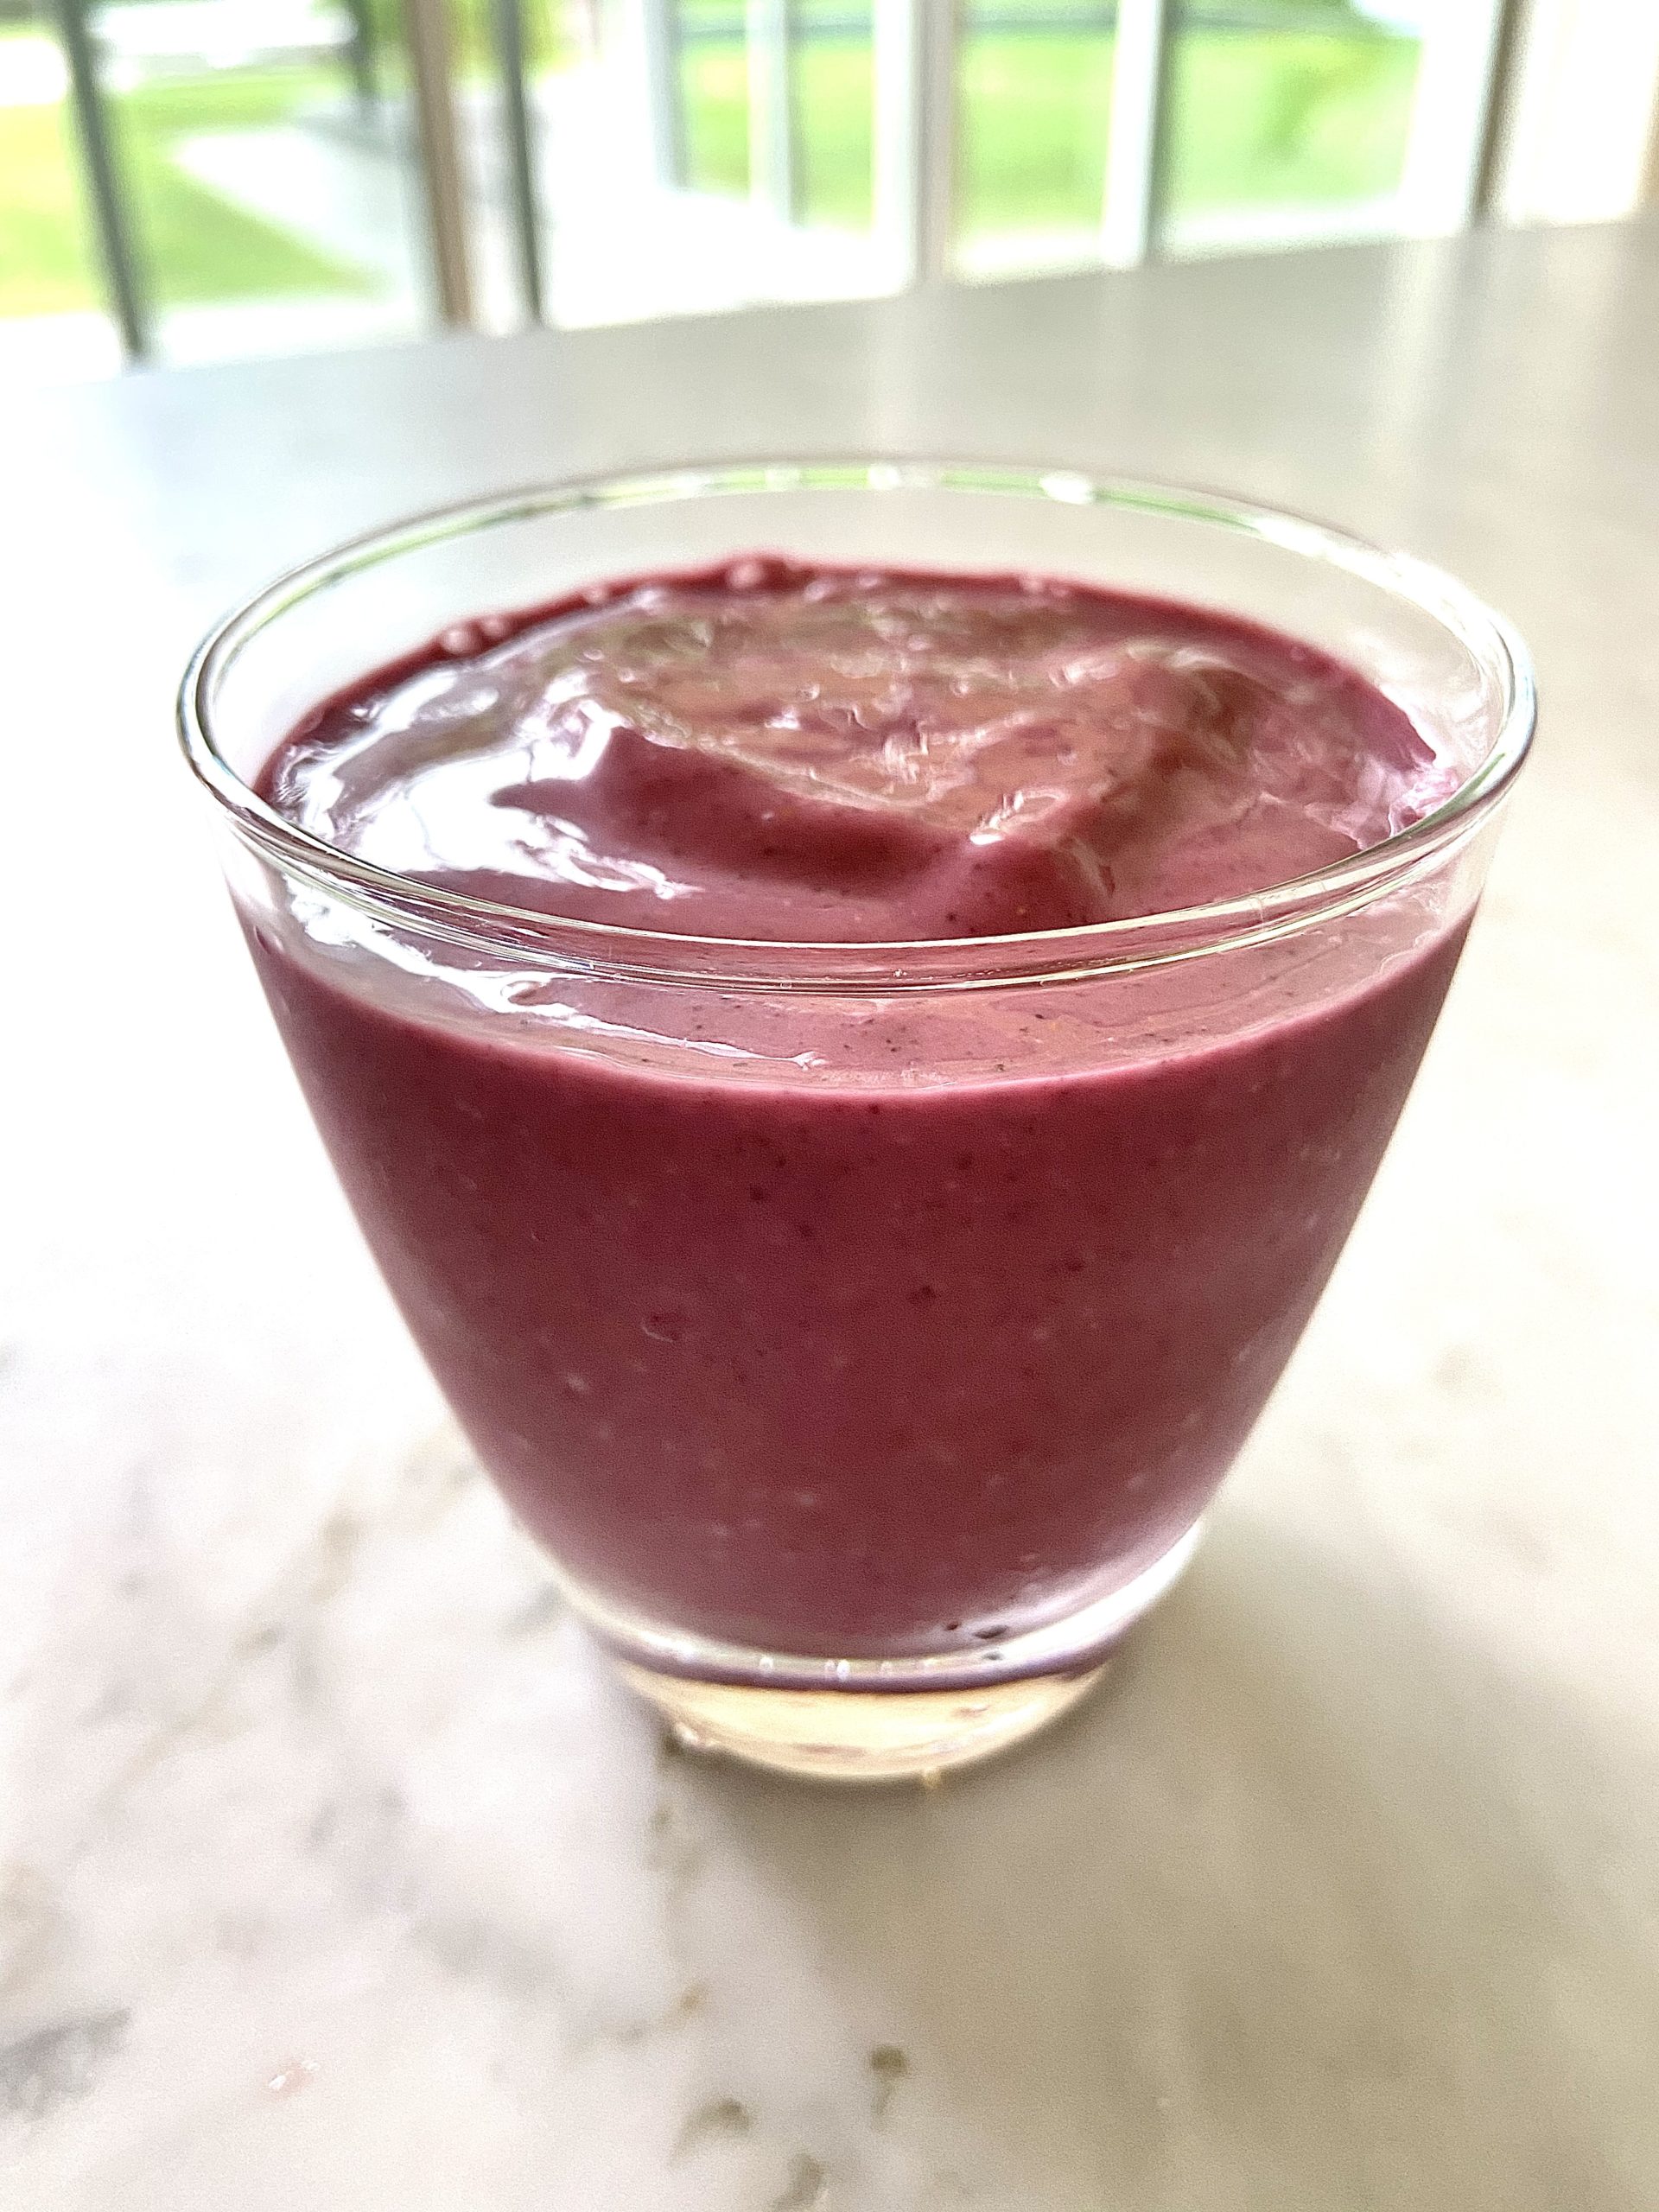 Julie Wilcox's Morning Antioxidant Smoothie. COURTESY THE AUTHOR